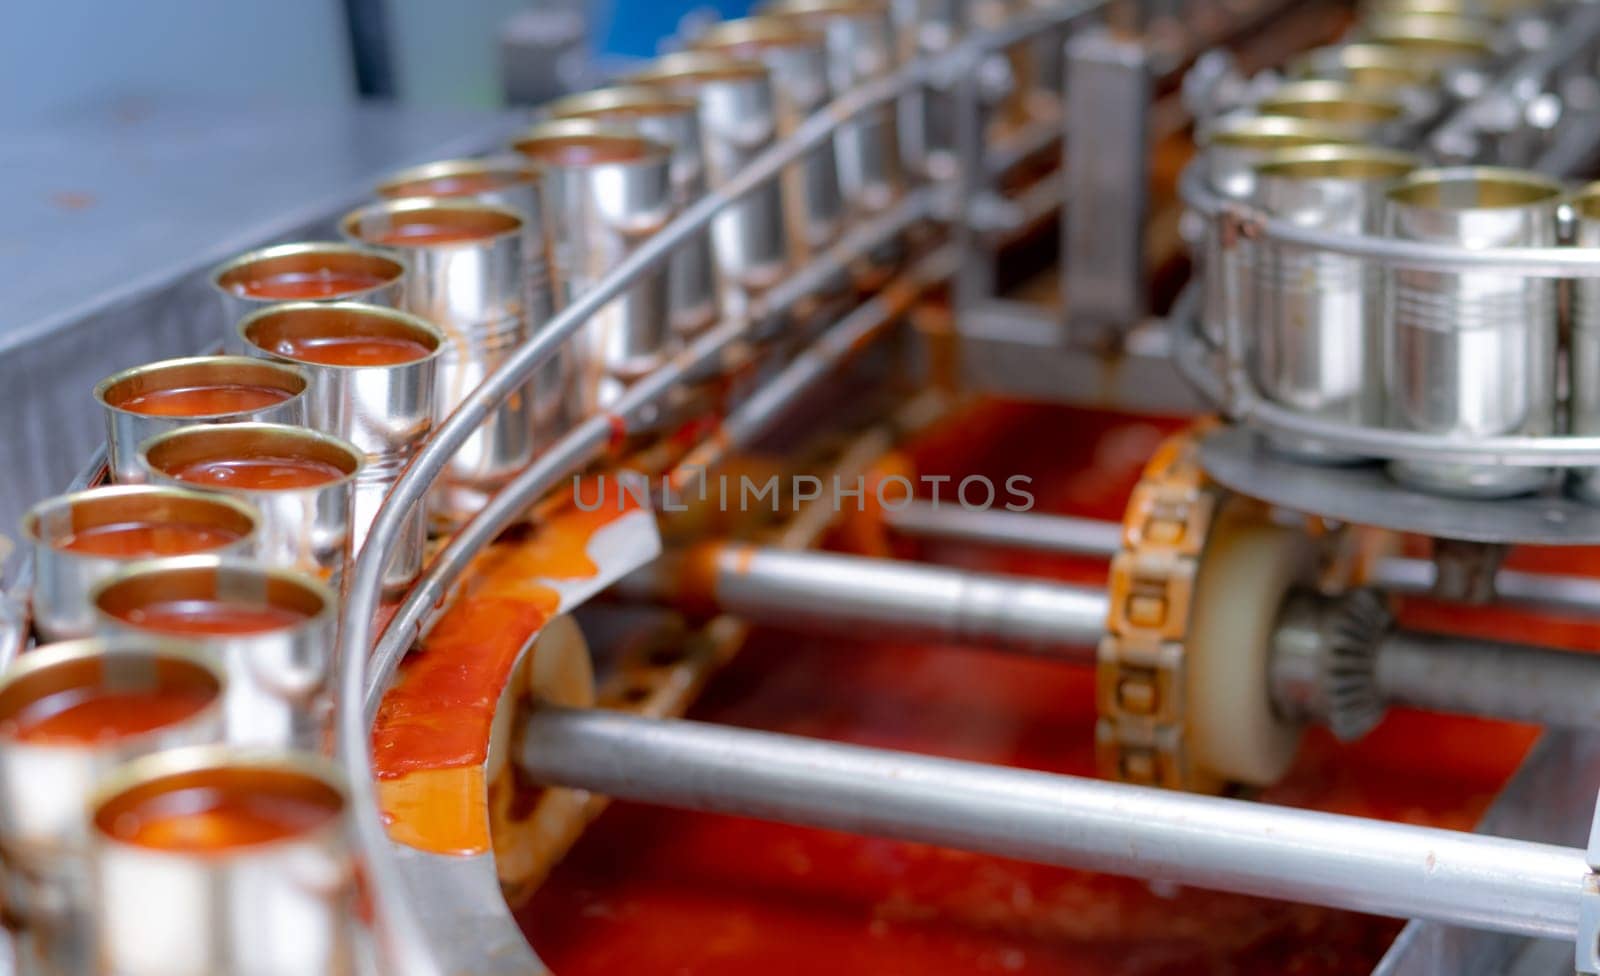 Canned fish factory. Food industry.  Sardines in red tomato sauce in tinned cans at food factory. Food processing production line. Food manufacturing industry. Many can of sardines on a conveyor belt. by Fahroni